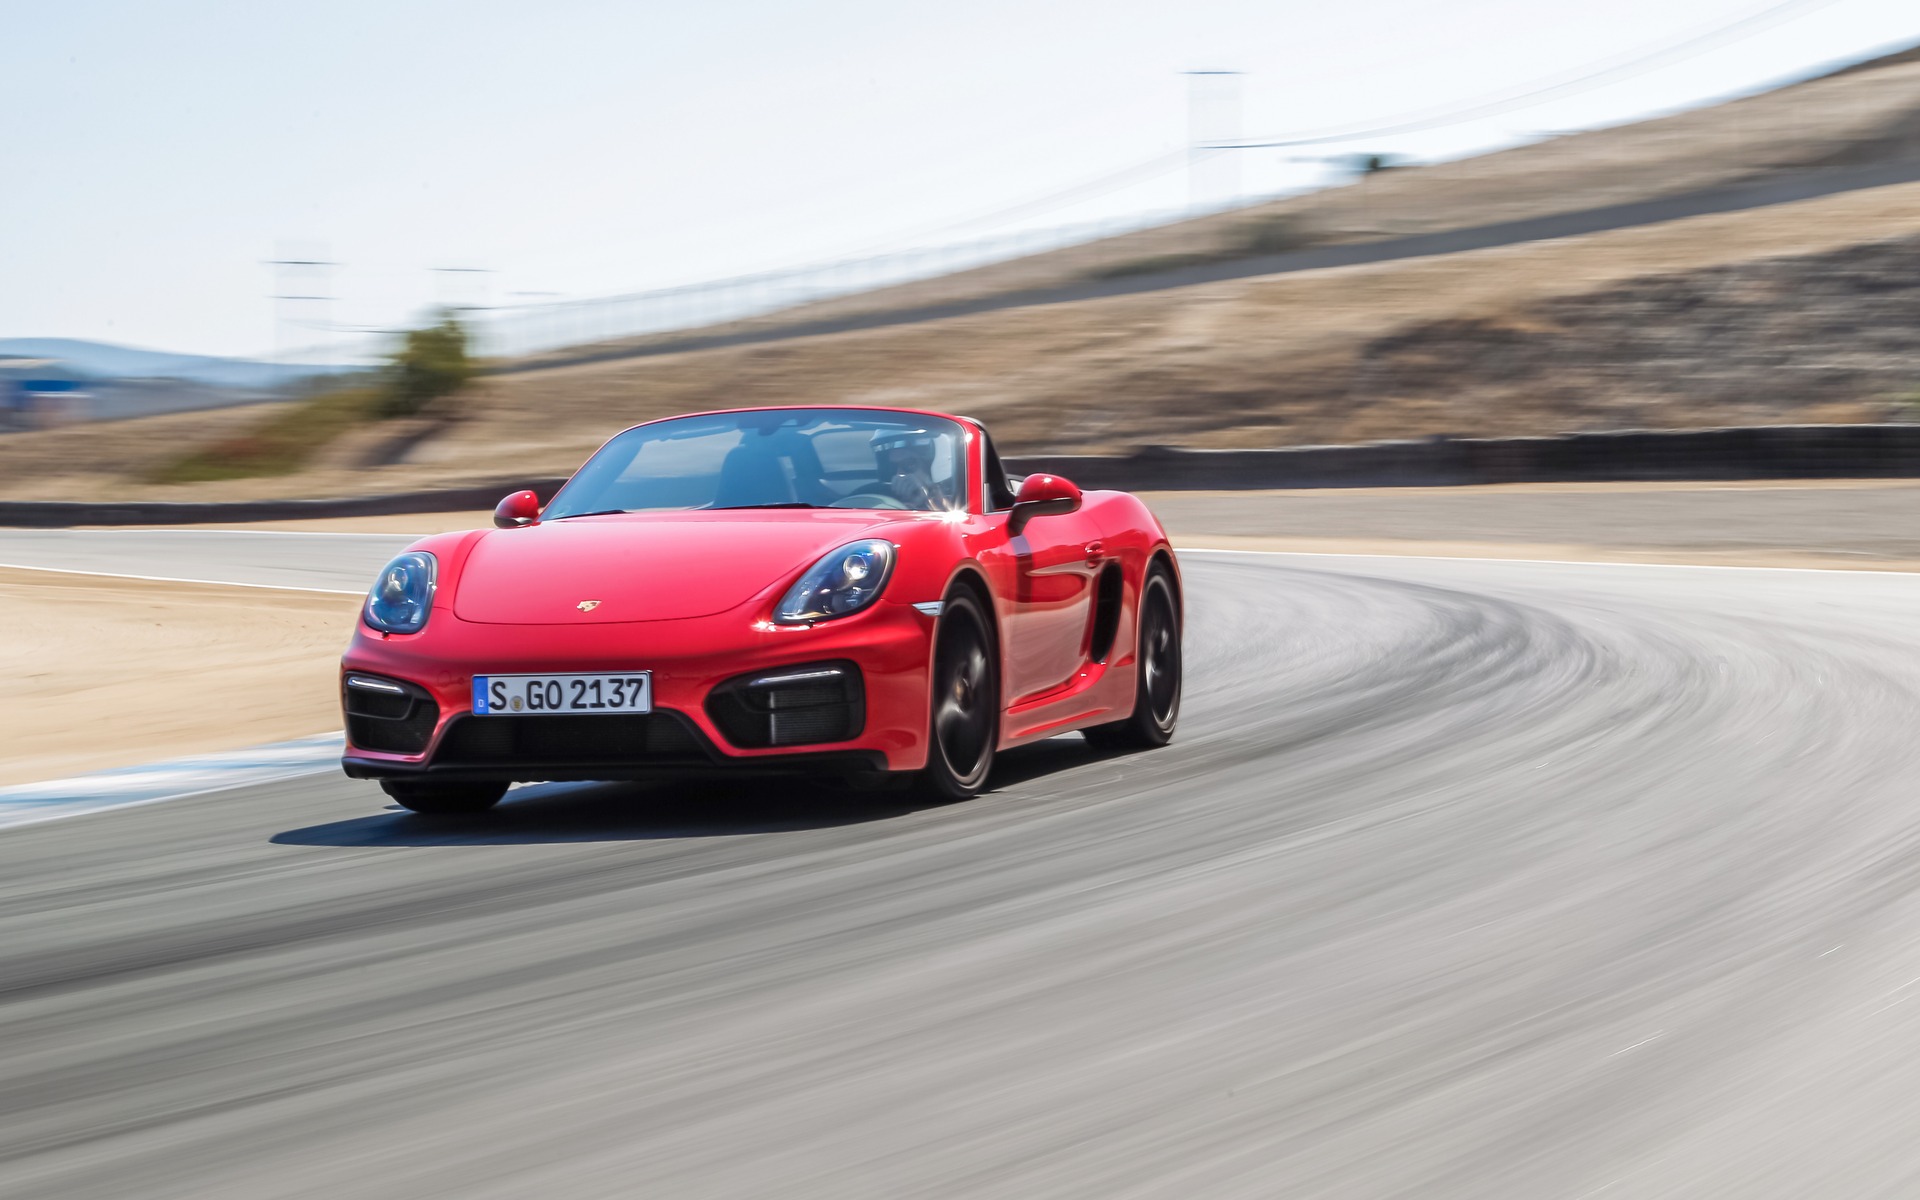 There's really only one 'correct' manner in which to drive the Boxster GTS.